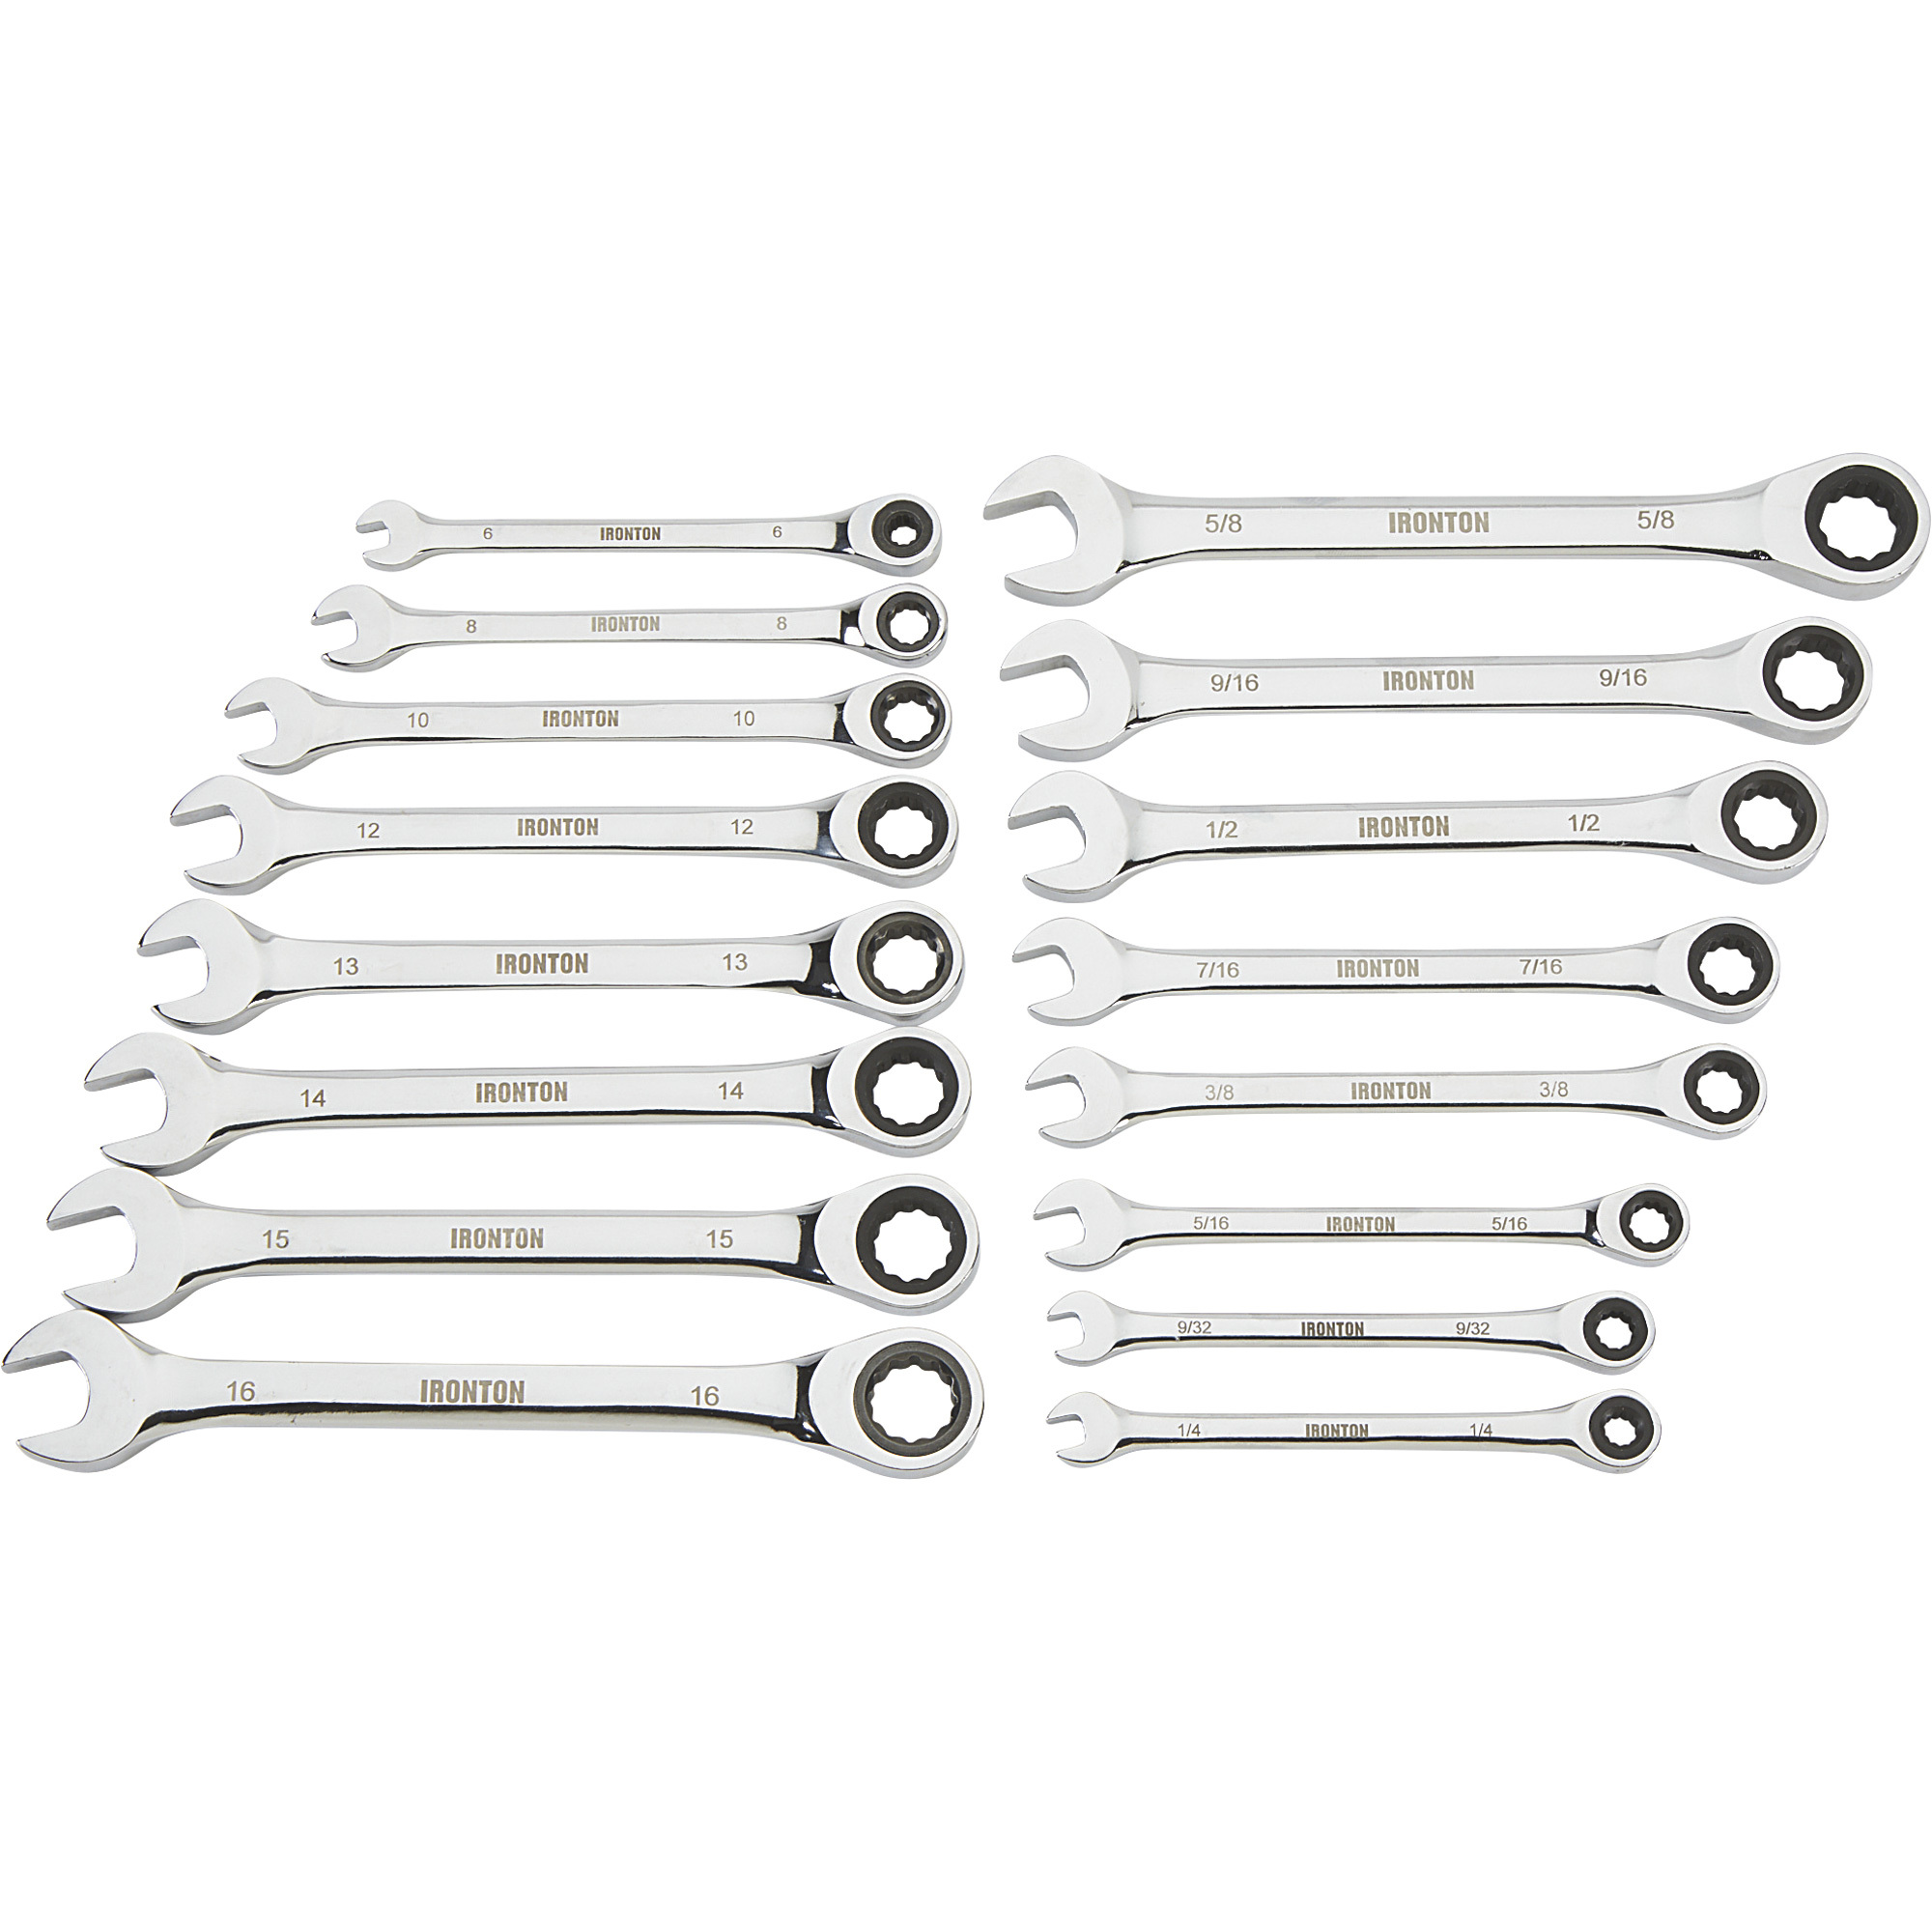 Ironton 16-Piece SAE/MM Ratchet Wrench Set, Model 573089A